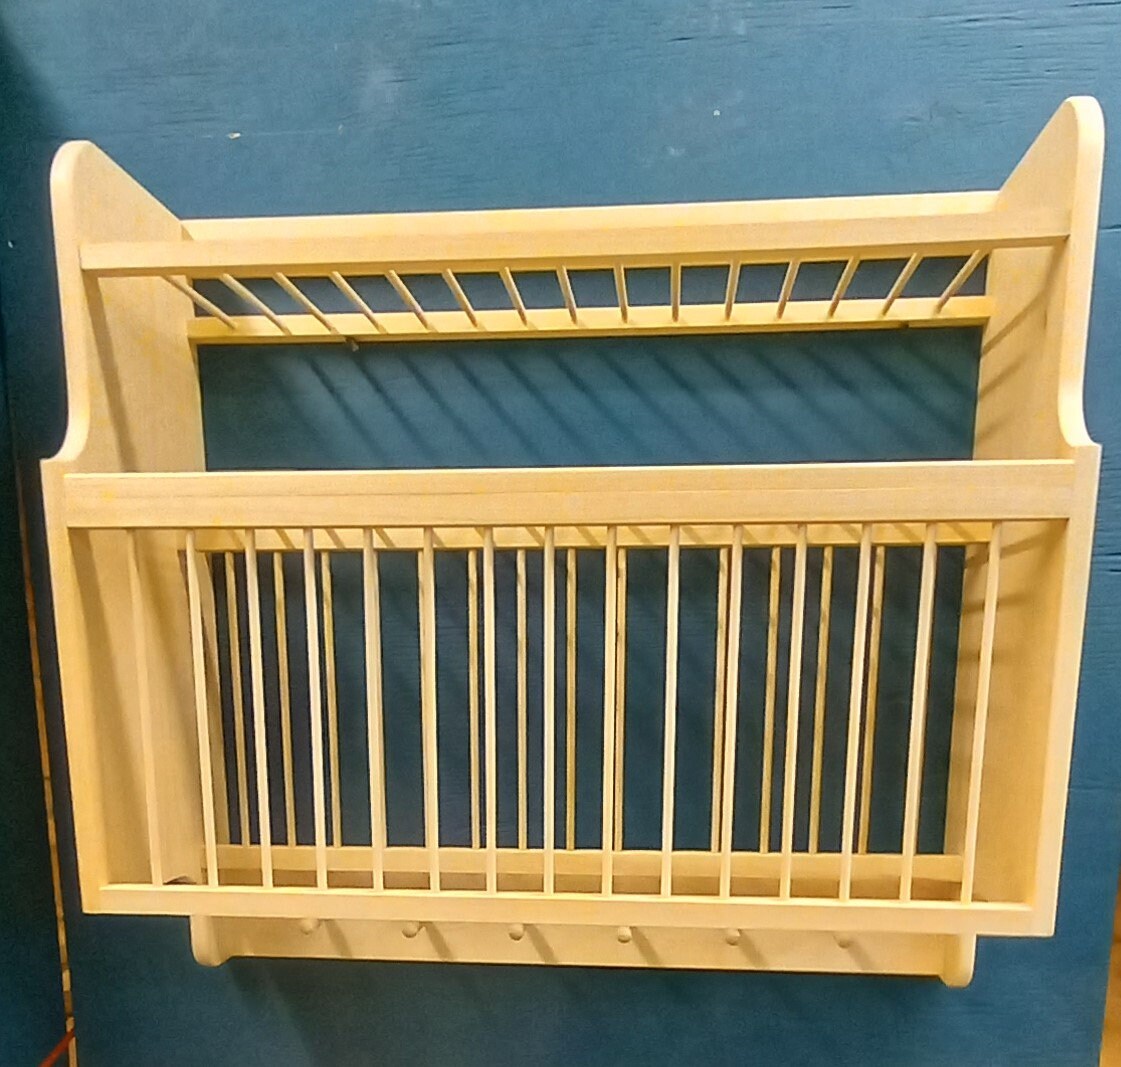 New unfinished Antique Style London dish drying Plate rack shelf cabinet with shaker pegs great storage for kitchen